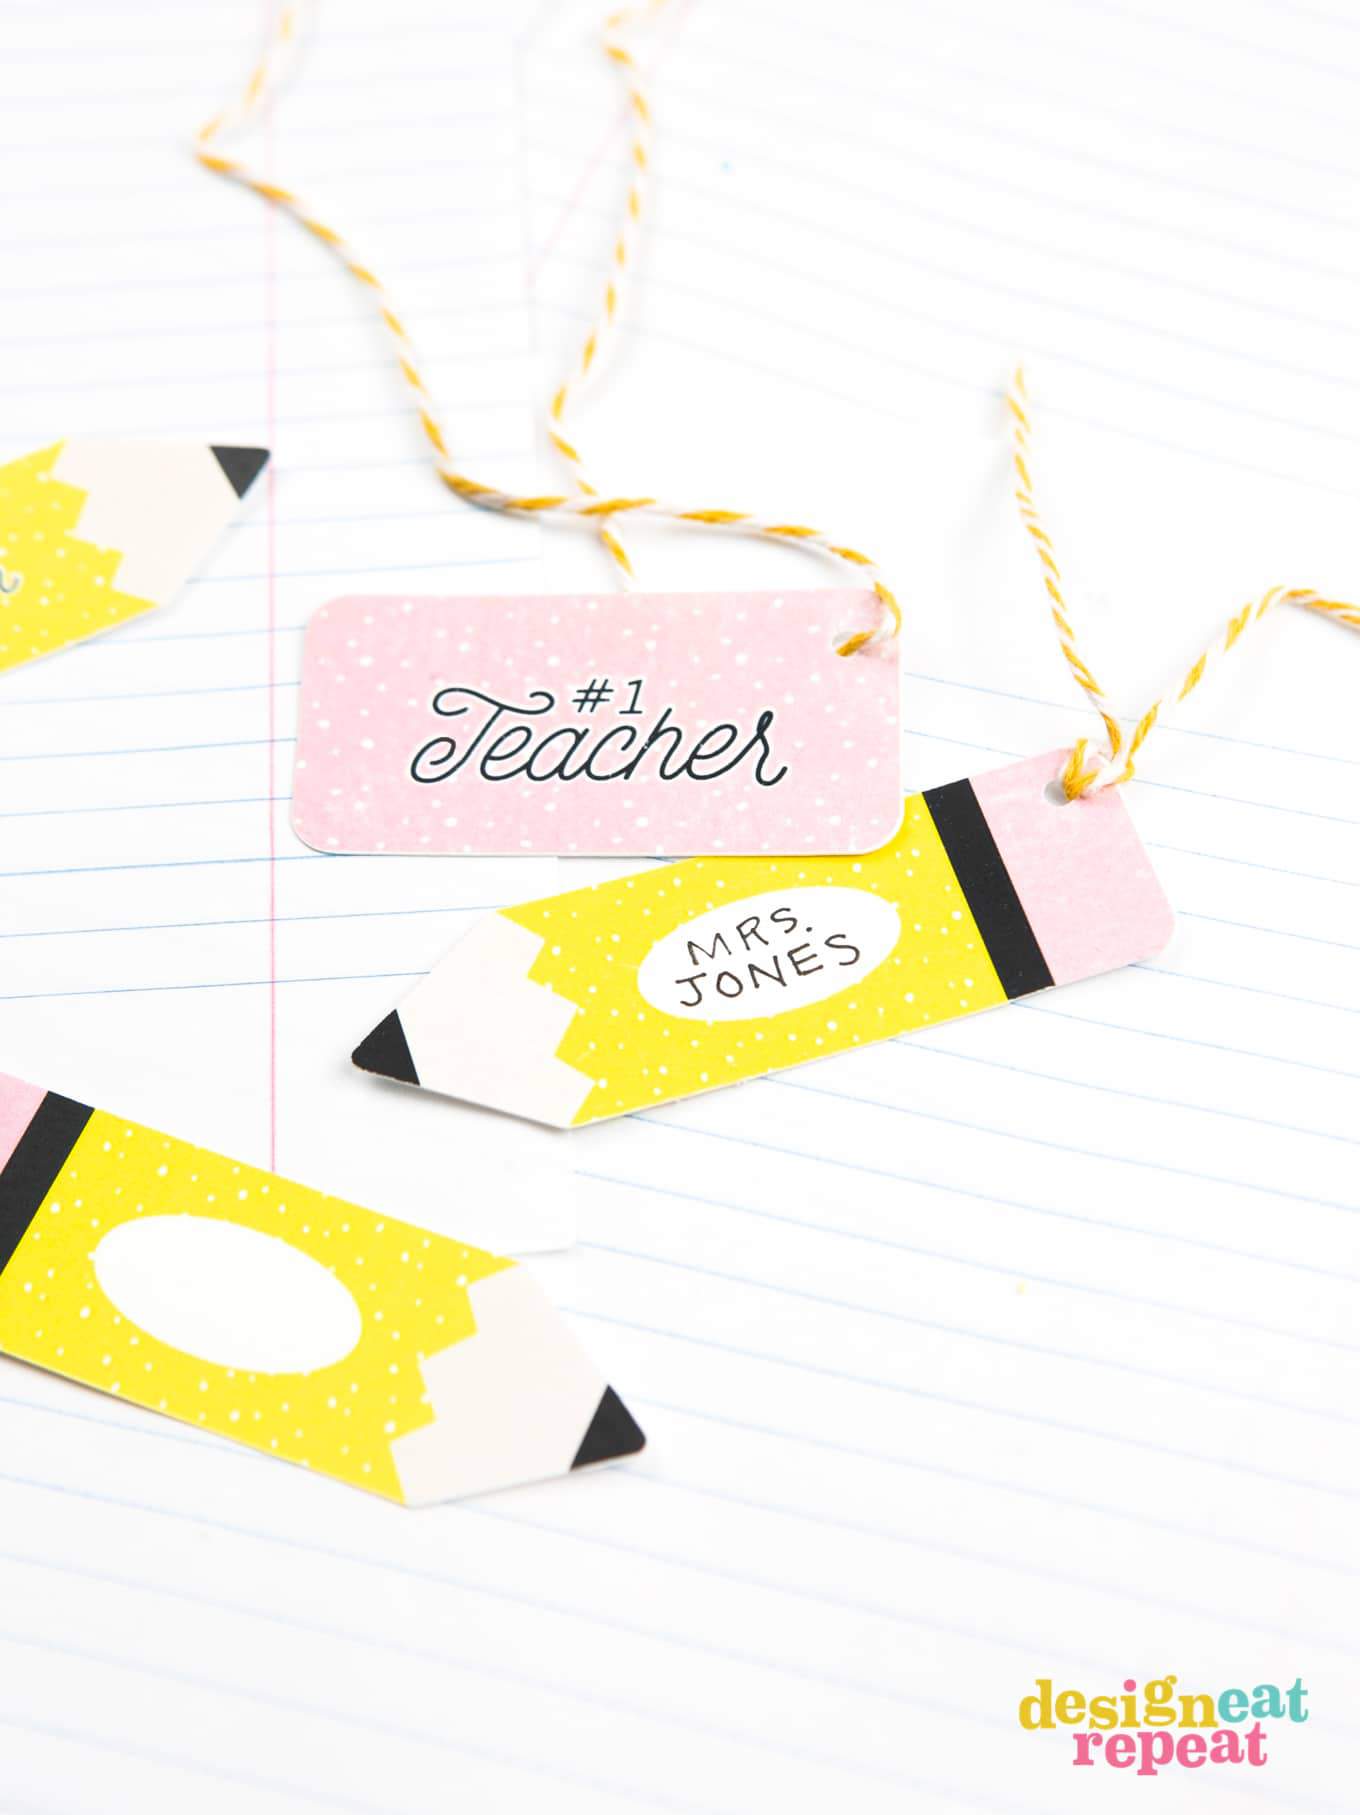 Pencil and eraser paper gift tags